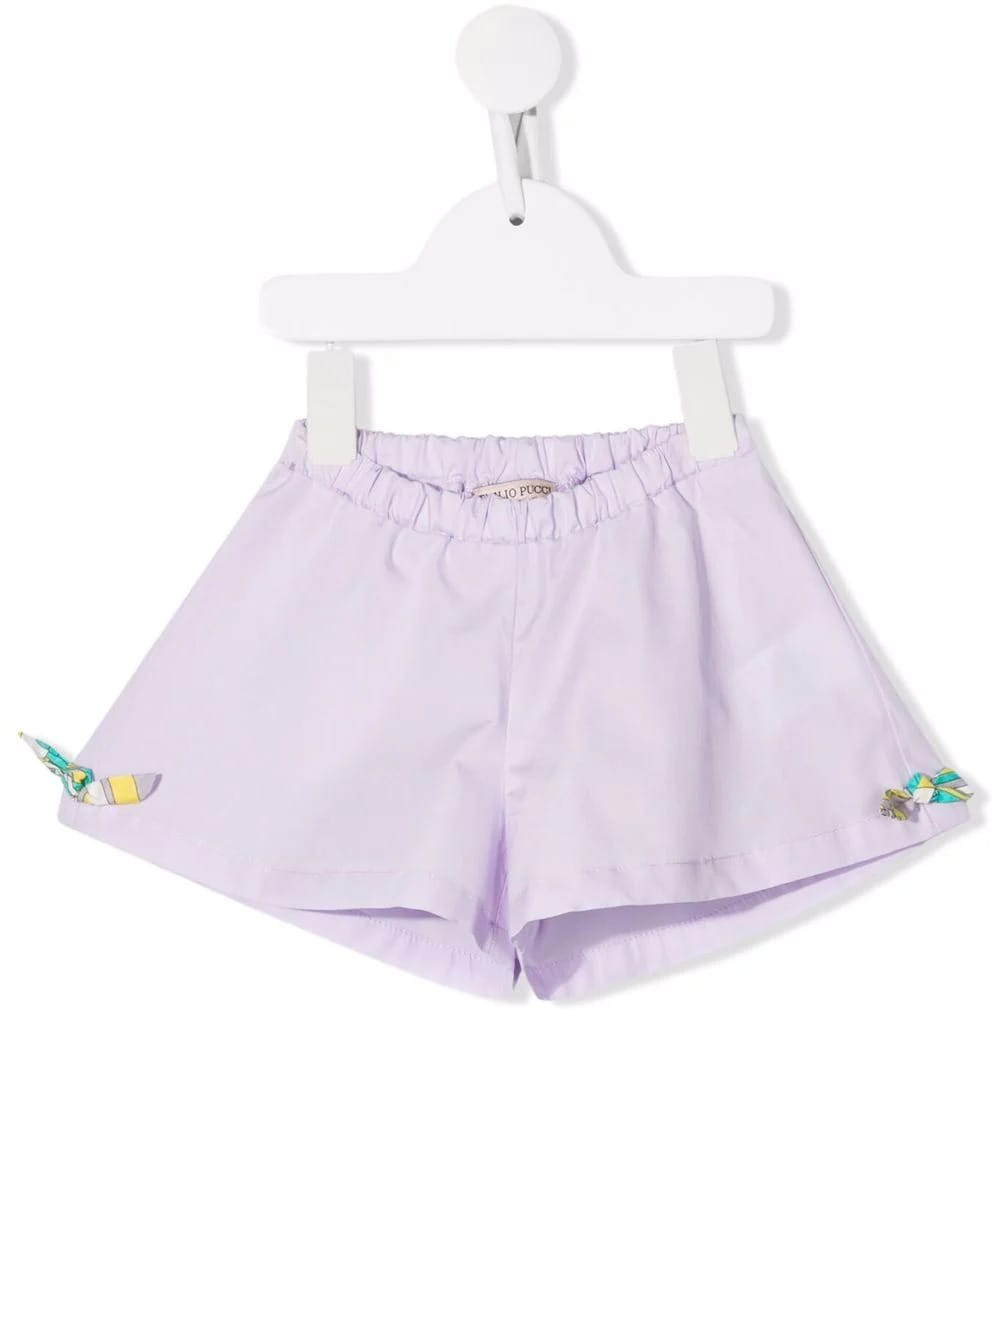 EMILIO PUCCI BABY LILAC SHORTS WITH MULTICOLORED SIDE BOWS